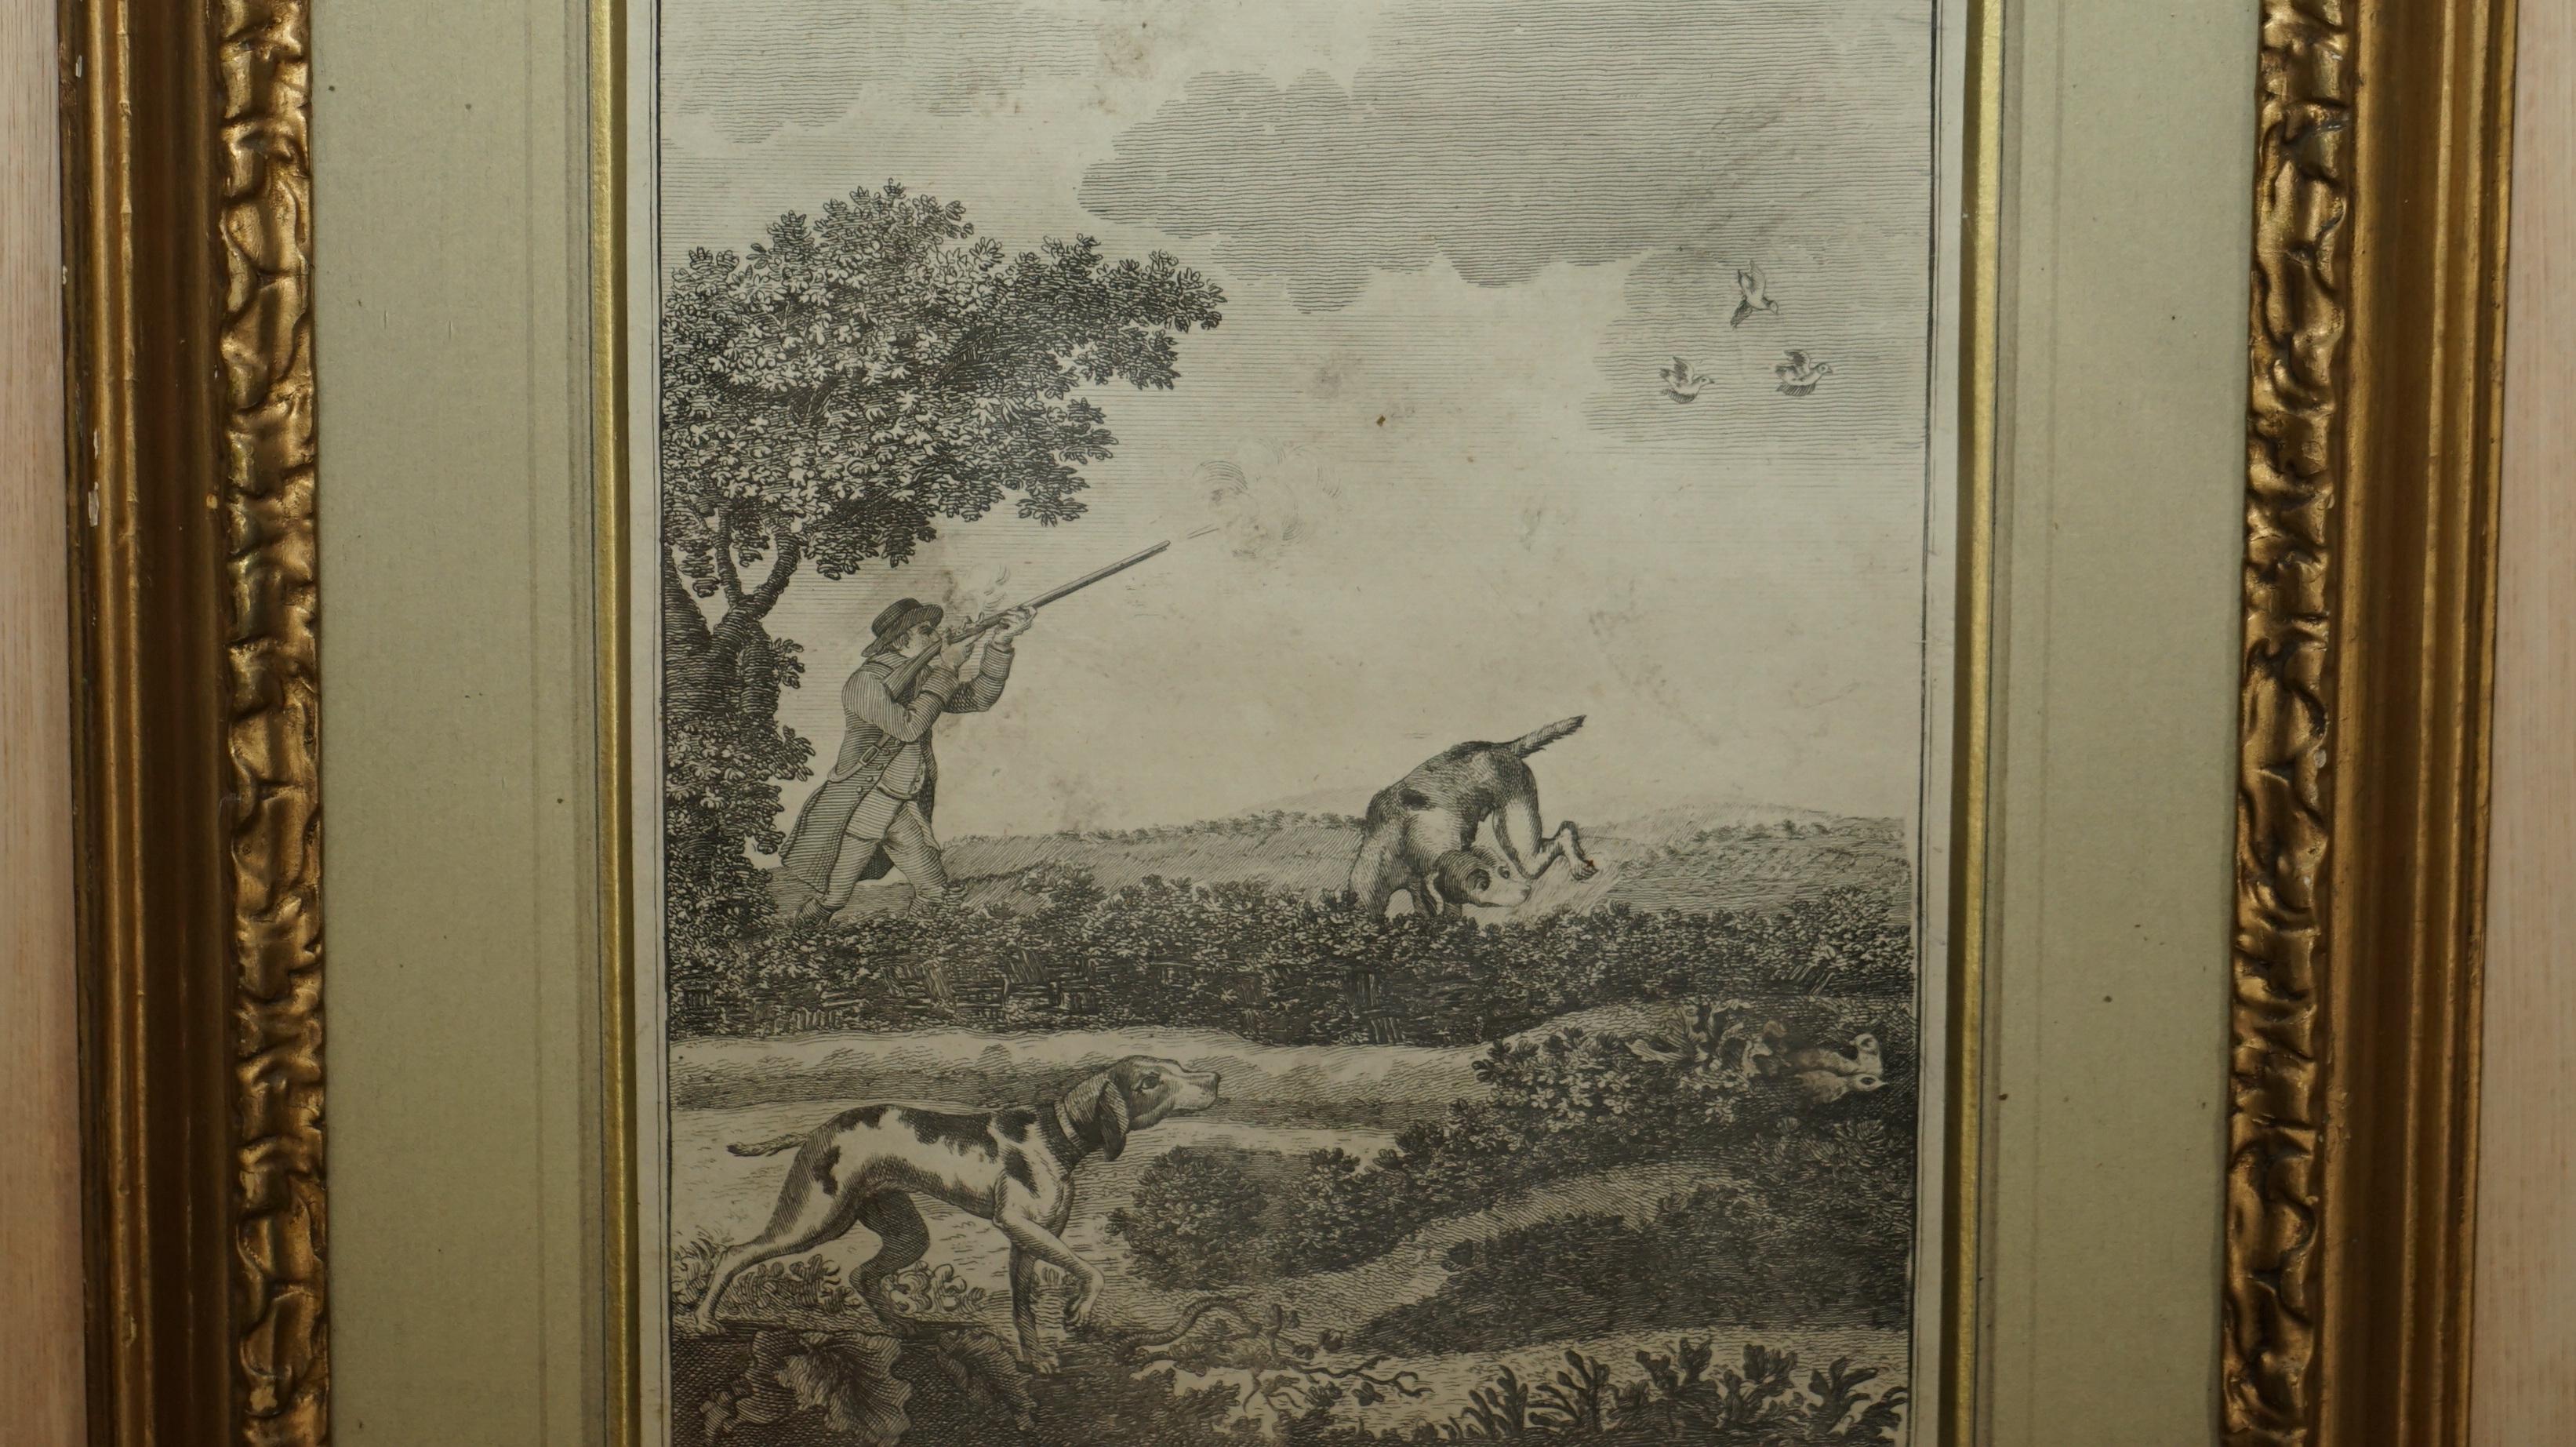 We are delighted to offer for sale this Robert Dodd 1748-1816 copper plate print published by The British Sportsman 1792 titled Partridge hunting

An original period print with frame, this is one of a pair, the second which is under my other items